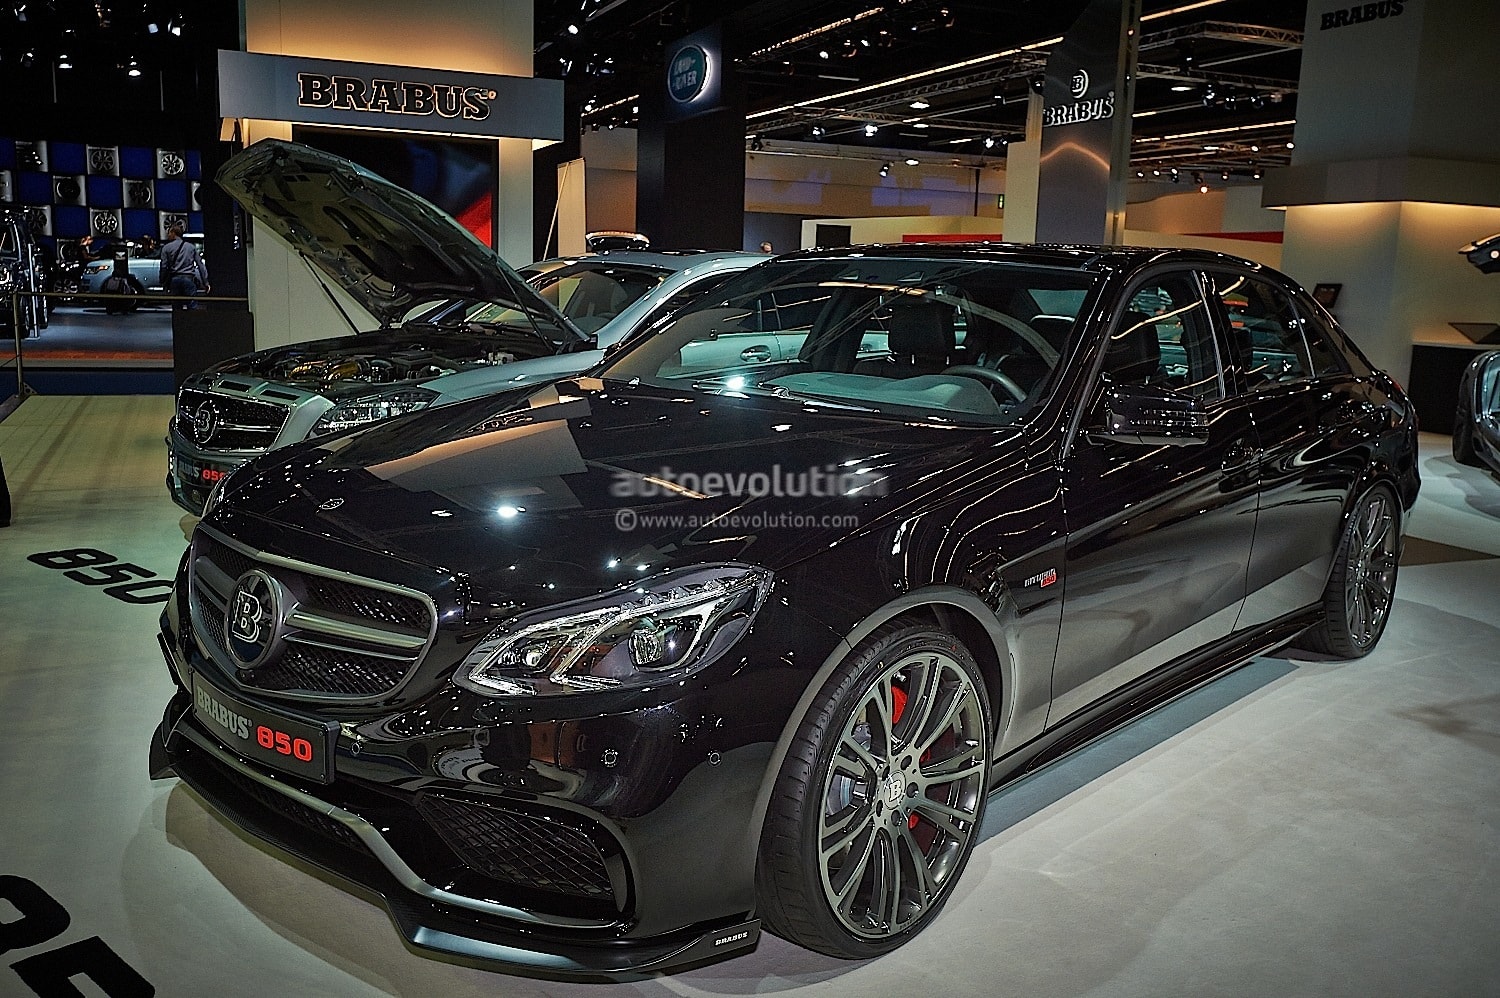 BRABUS 850: The Apex of Luxury and Performance in a V12 Sedan